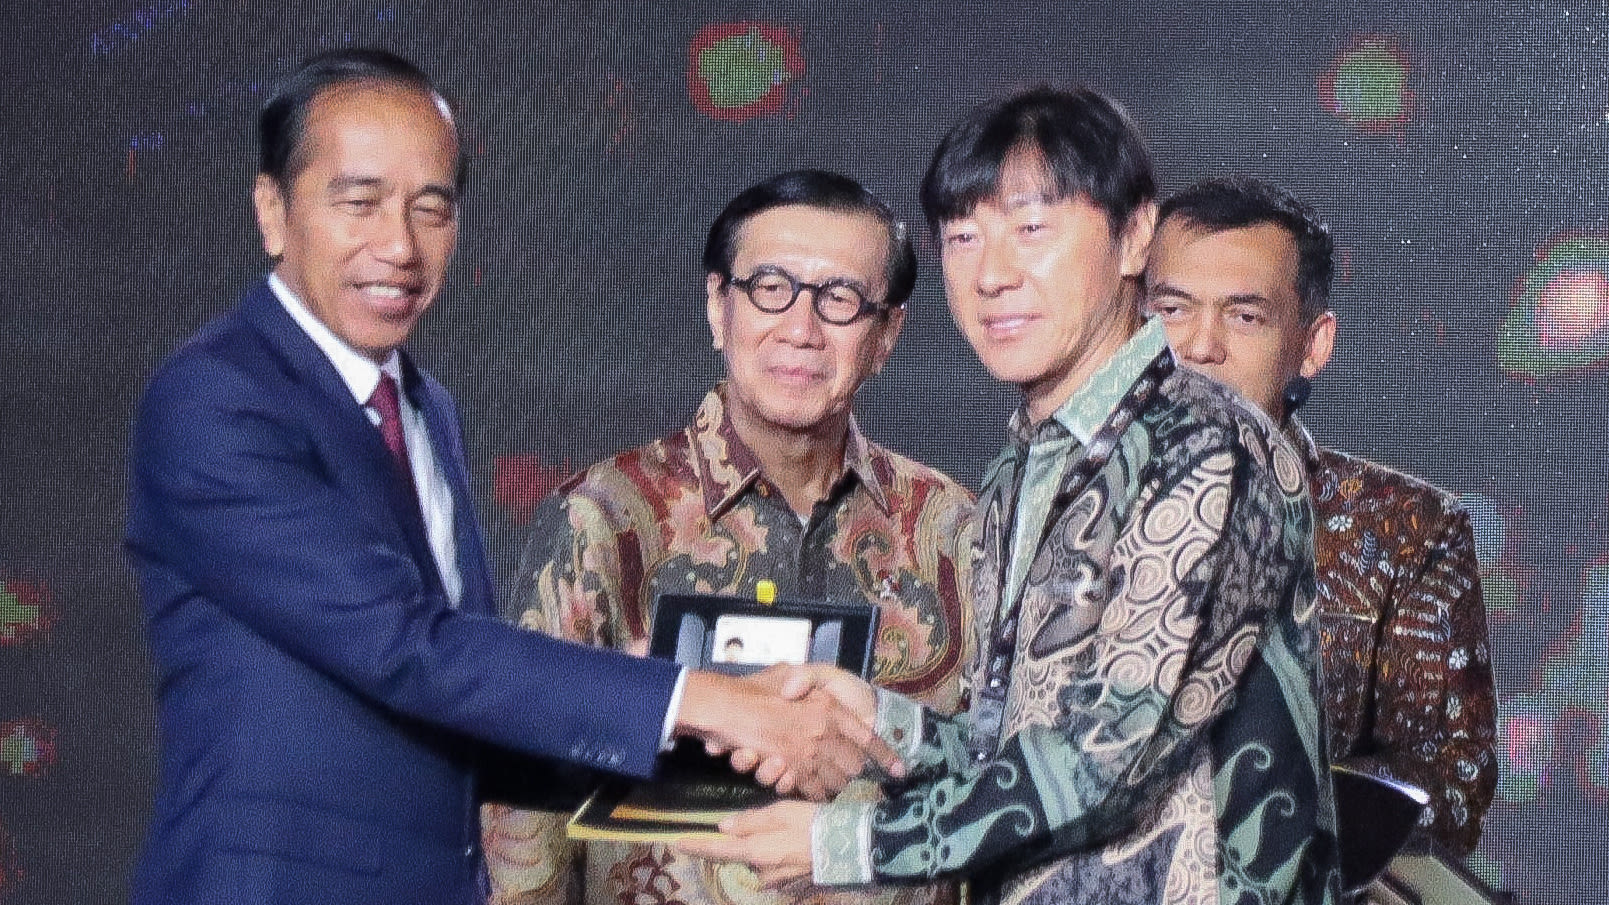 Indonesia launches 'golden visa' program to attract business investment